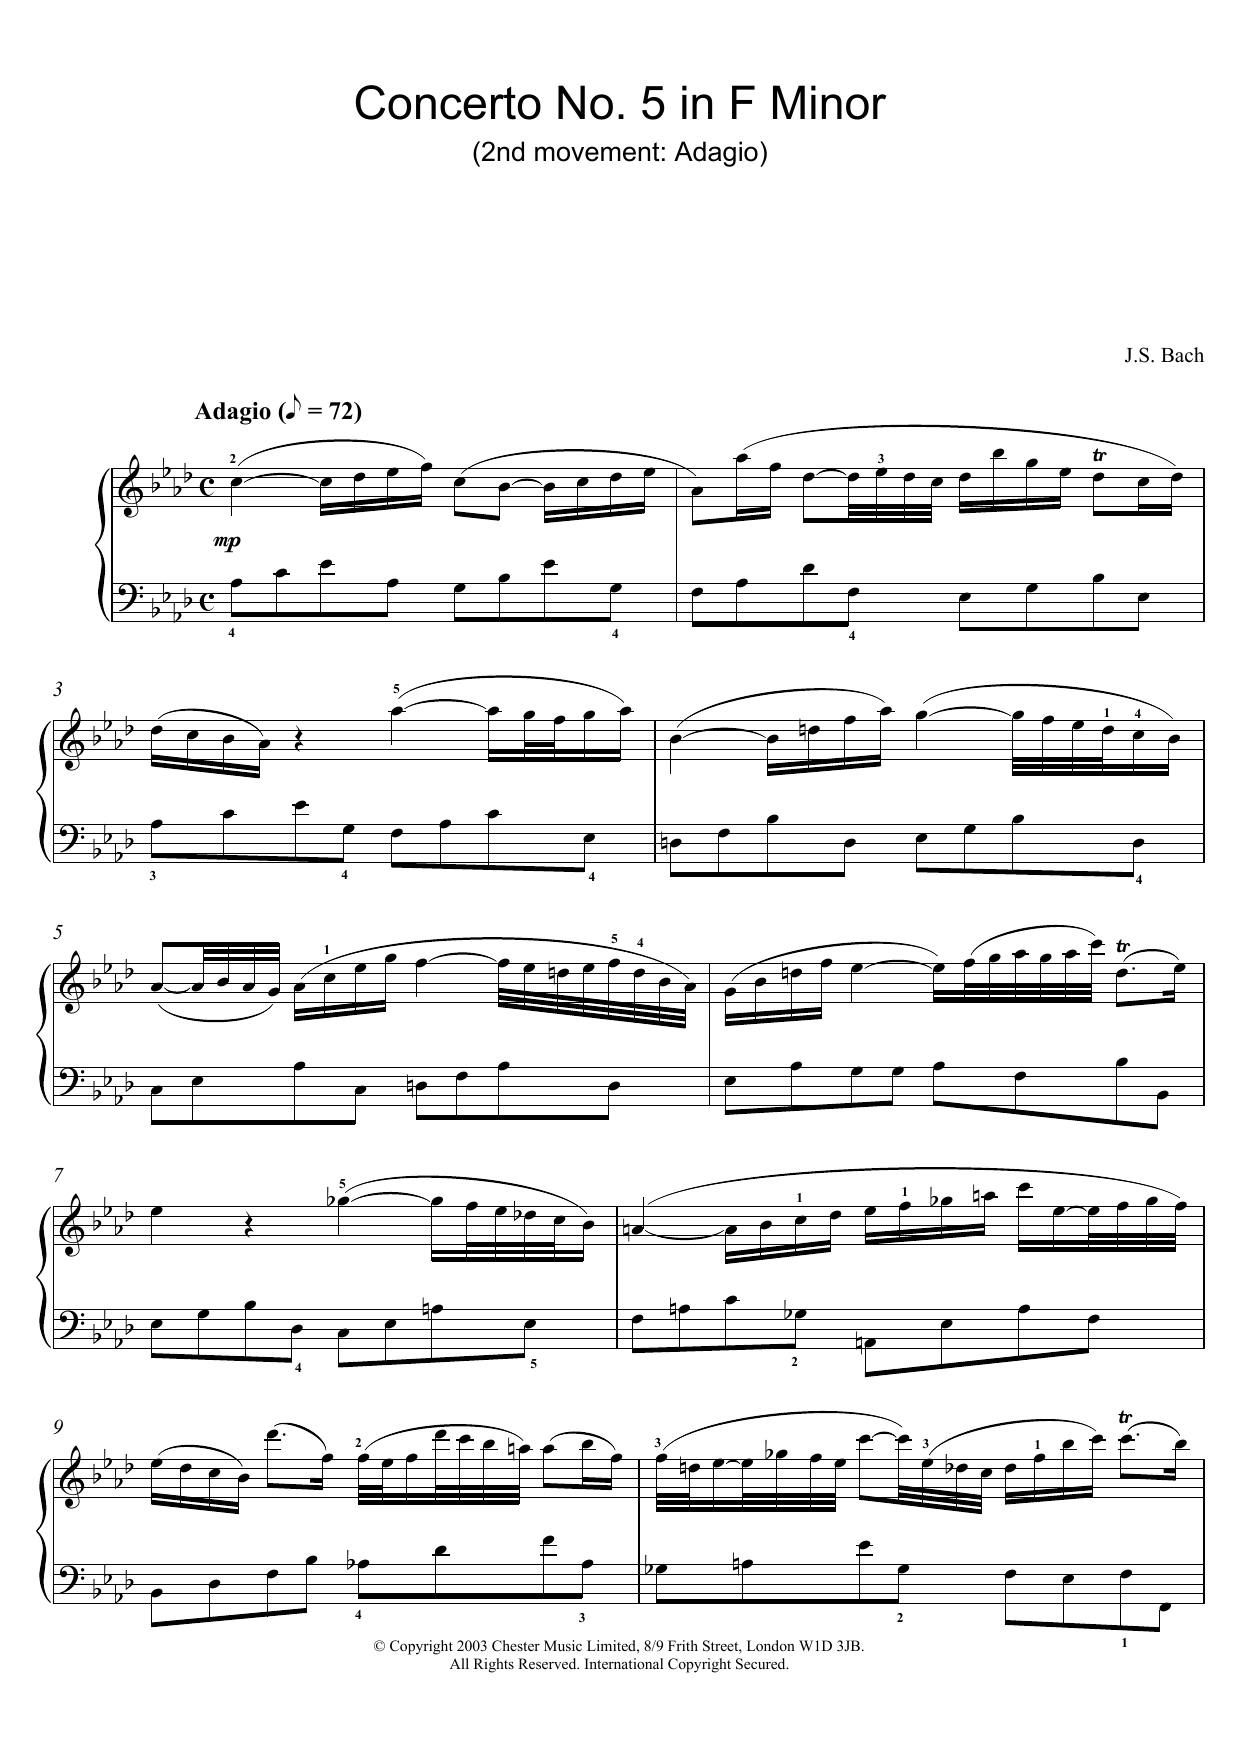 J.S. Bach Piano Concerto No. 5 in F Minor (2nd movement: Adagio) sheet music preview music notes and score for Piano including 2 page(s)